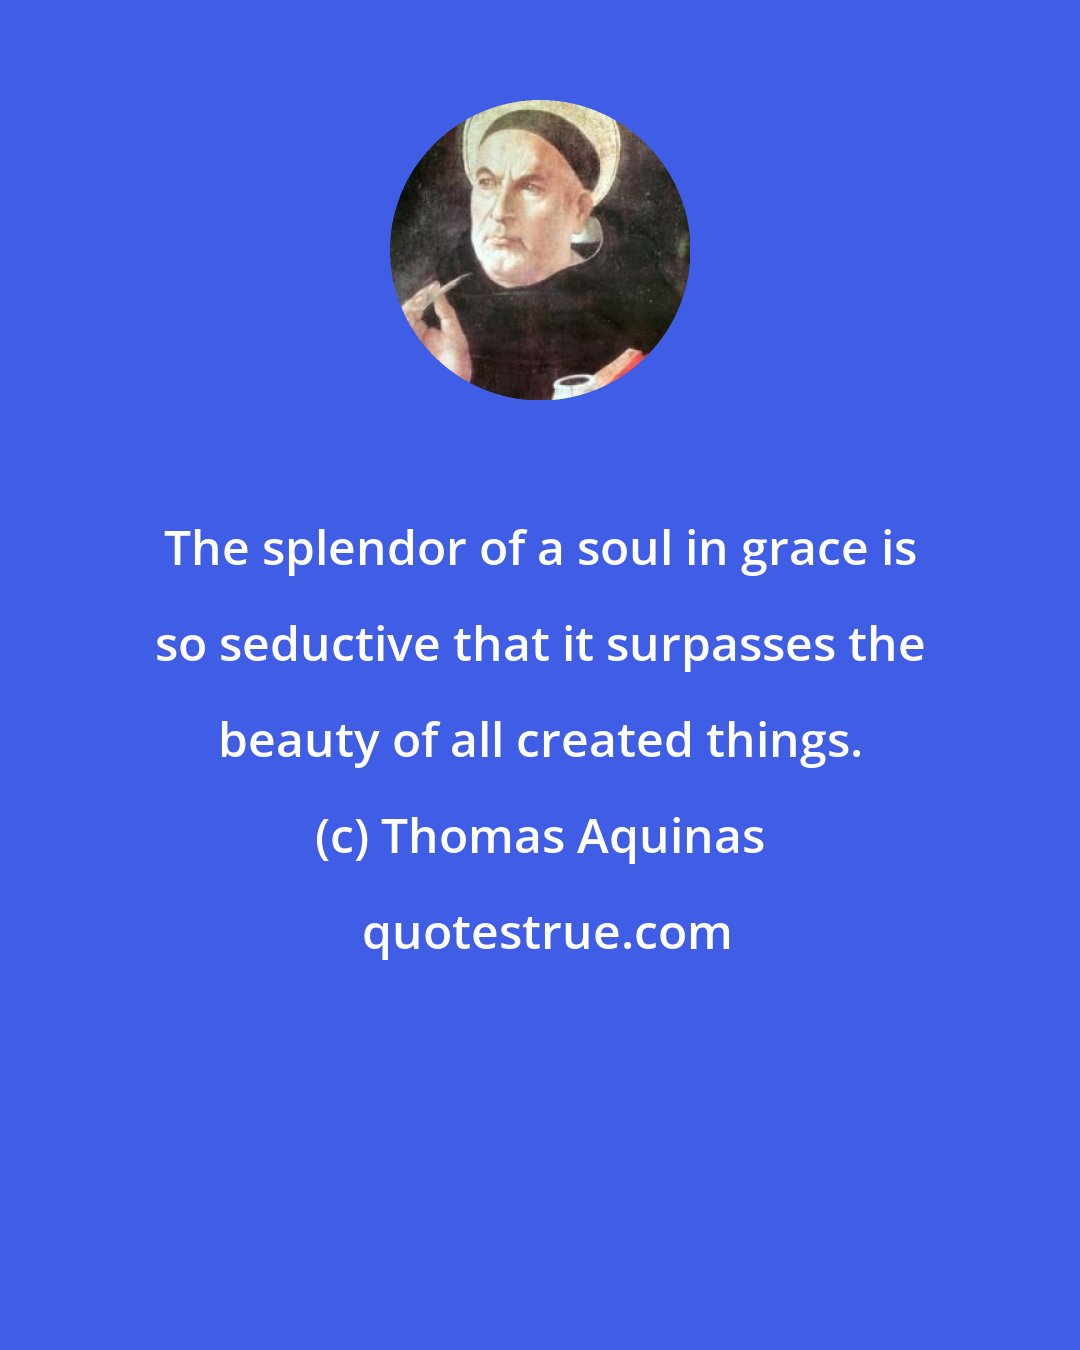 Thomas Aquinas: The splendor of a soul in grace is so seductive that it surpasses the beauty of all created things.